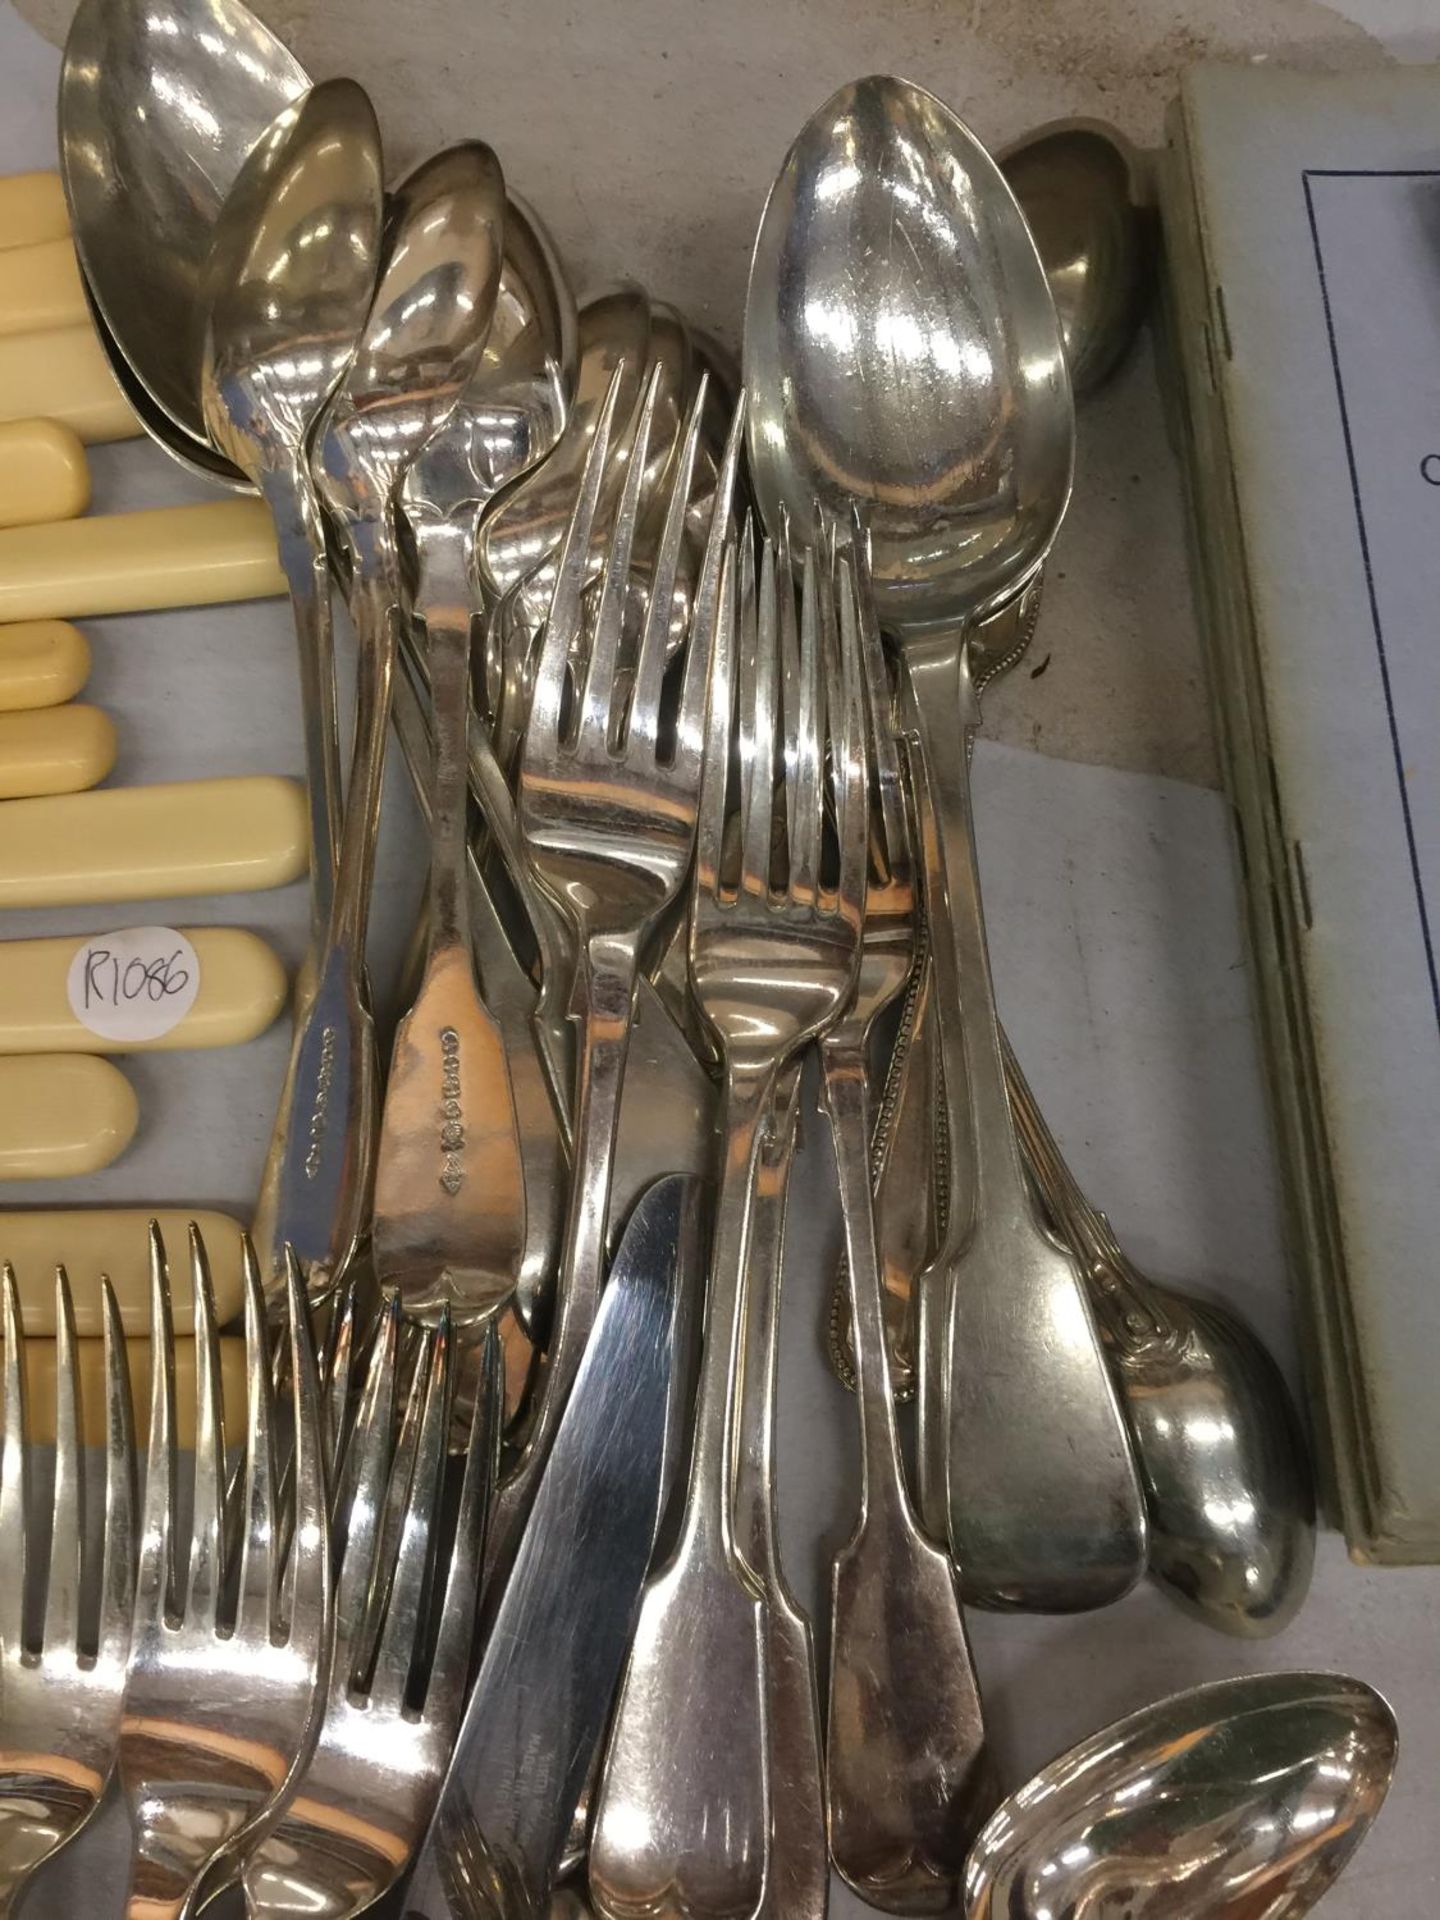 A LARGE QUANTITY OF VINTAGE FLATWARE - Image 3 of 3